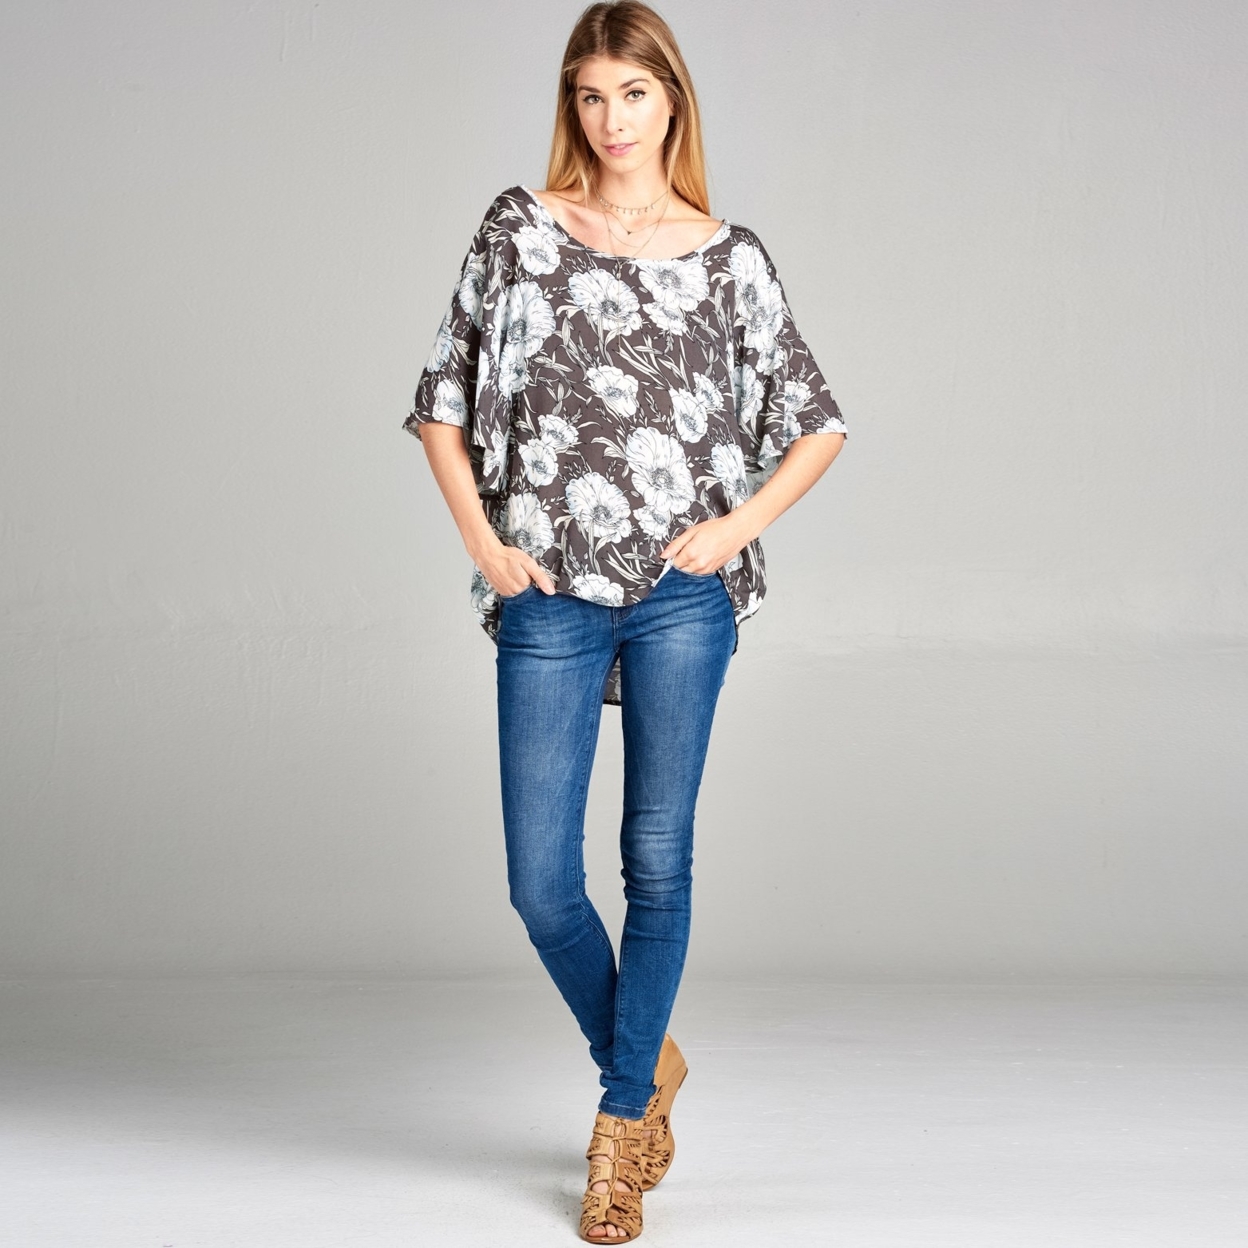 Butterfly Sleeve Floral Top - Warm Grey, Small (2-6)